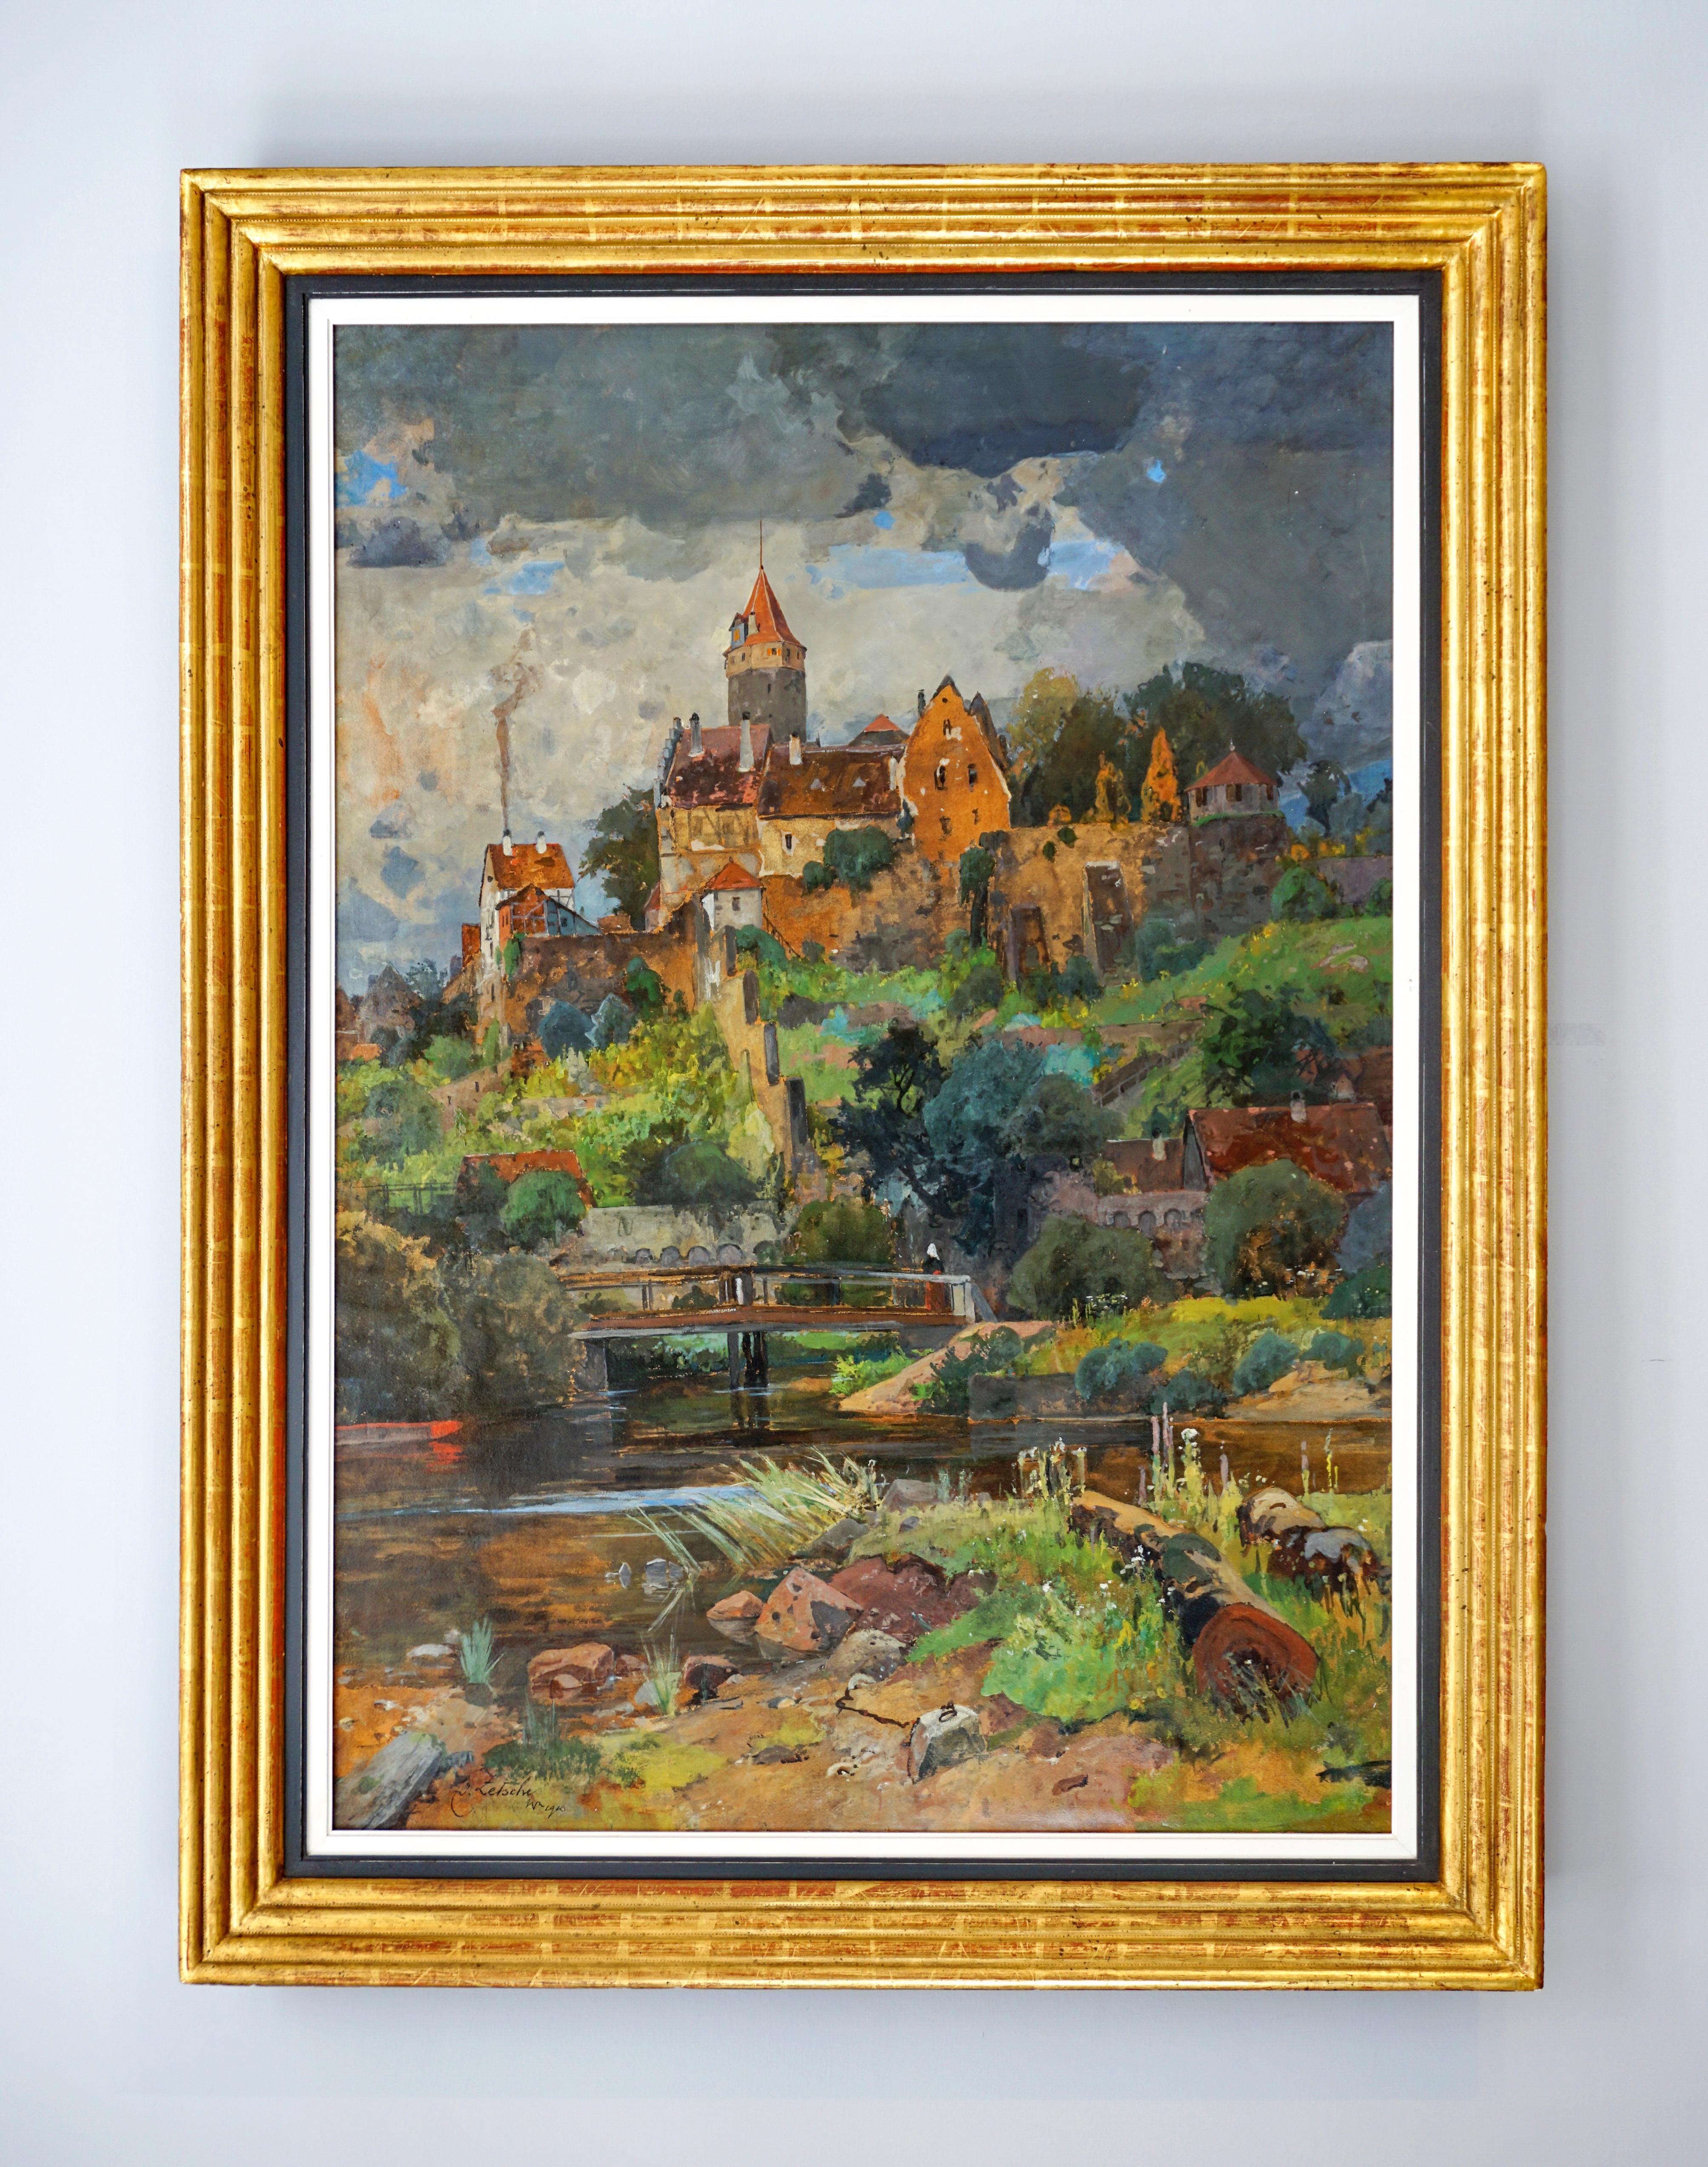 Other Large Oil Painting 'Old Town in Swabia', by Eduard Zetsche, Vienna, 1910 For Sale